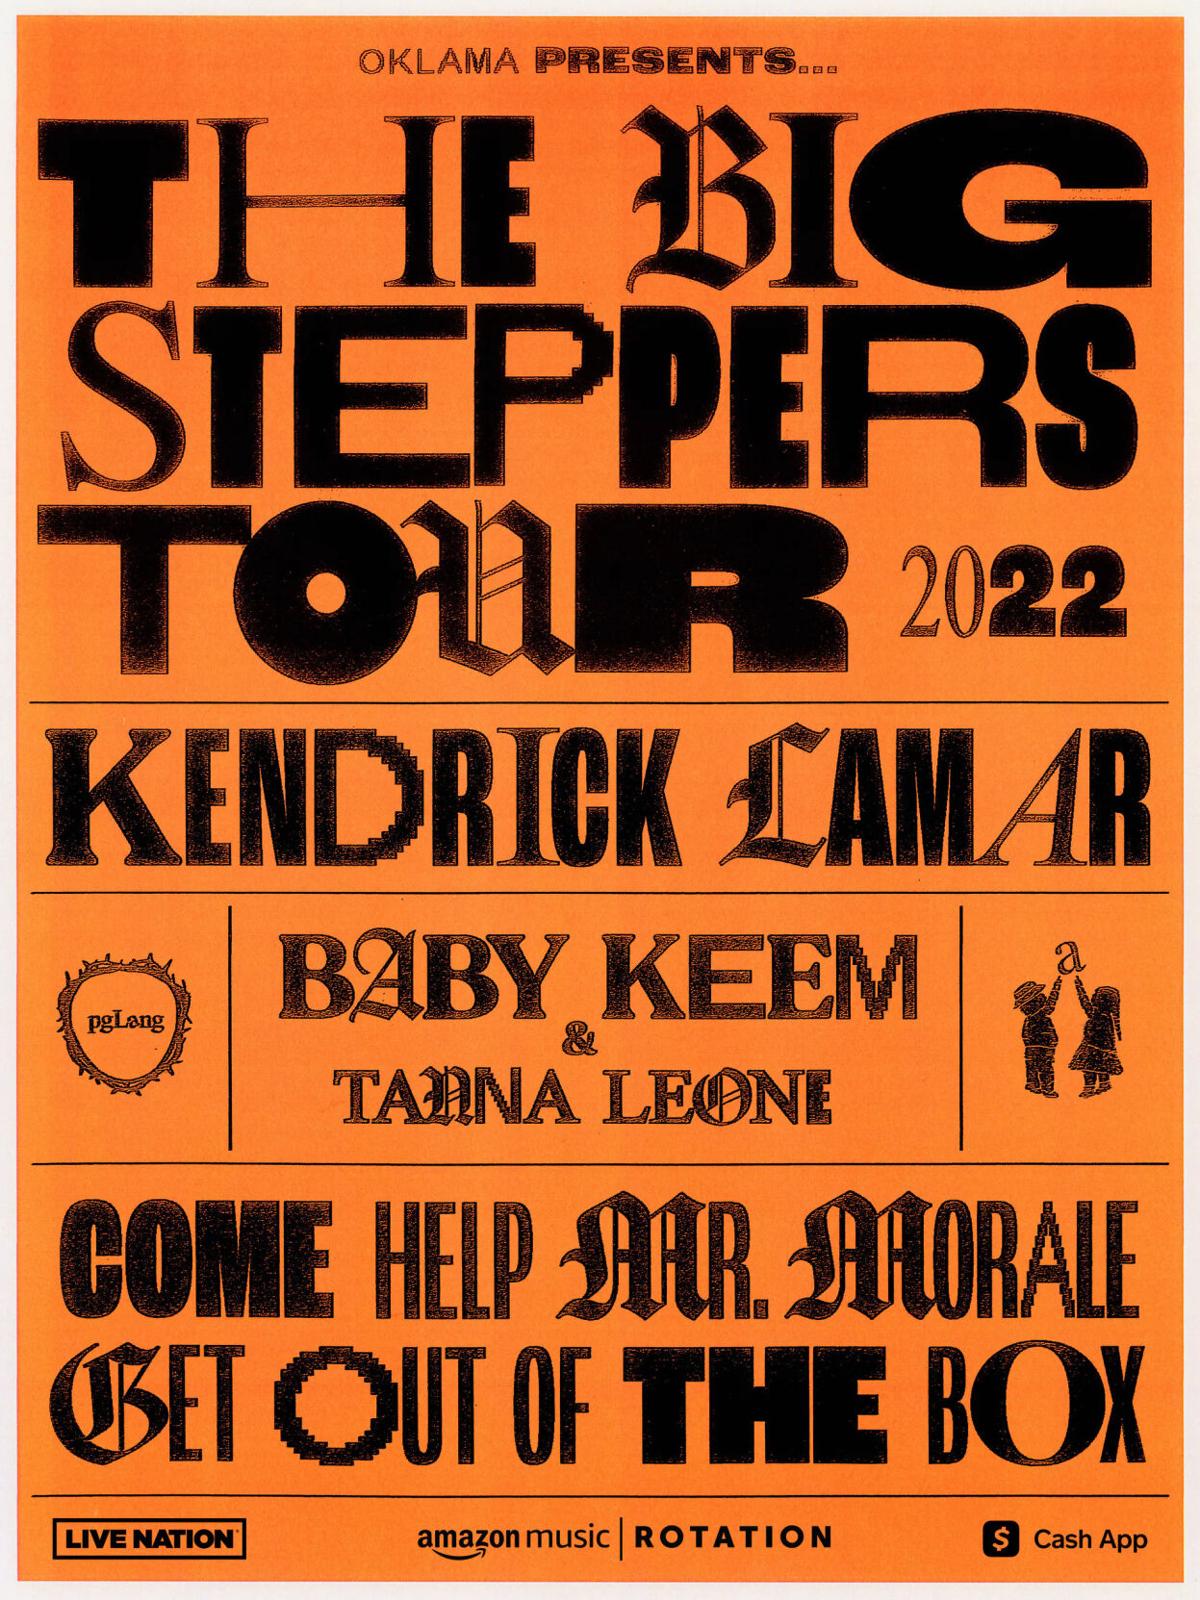 Kendrick Lamar makes a thrilling return to Anaheim's Honda Center with The  Big Steppers Tour – Orange County Register